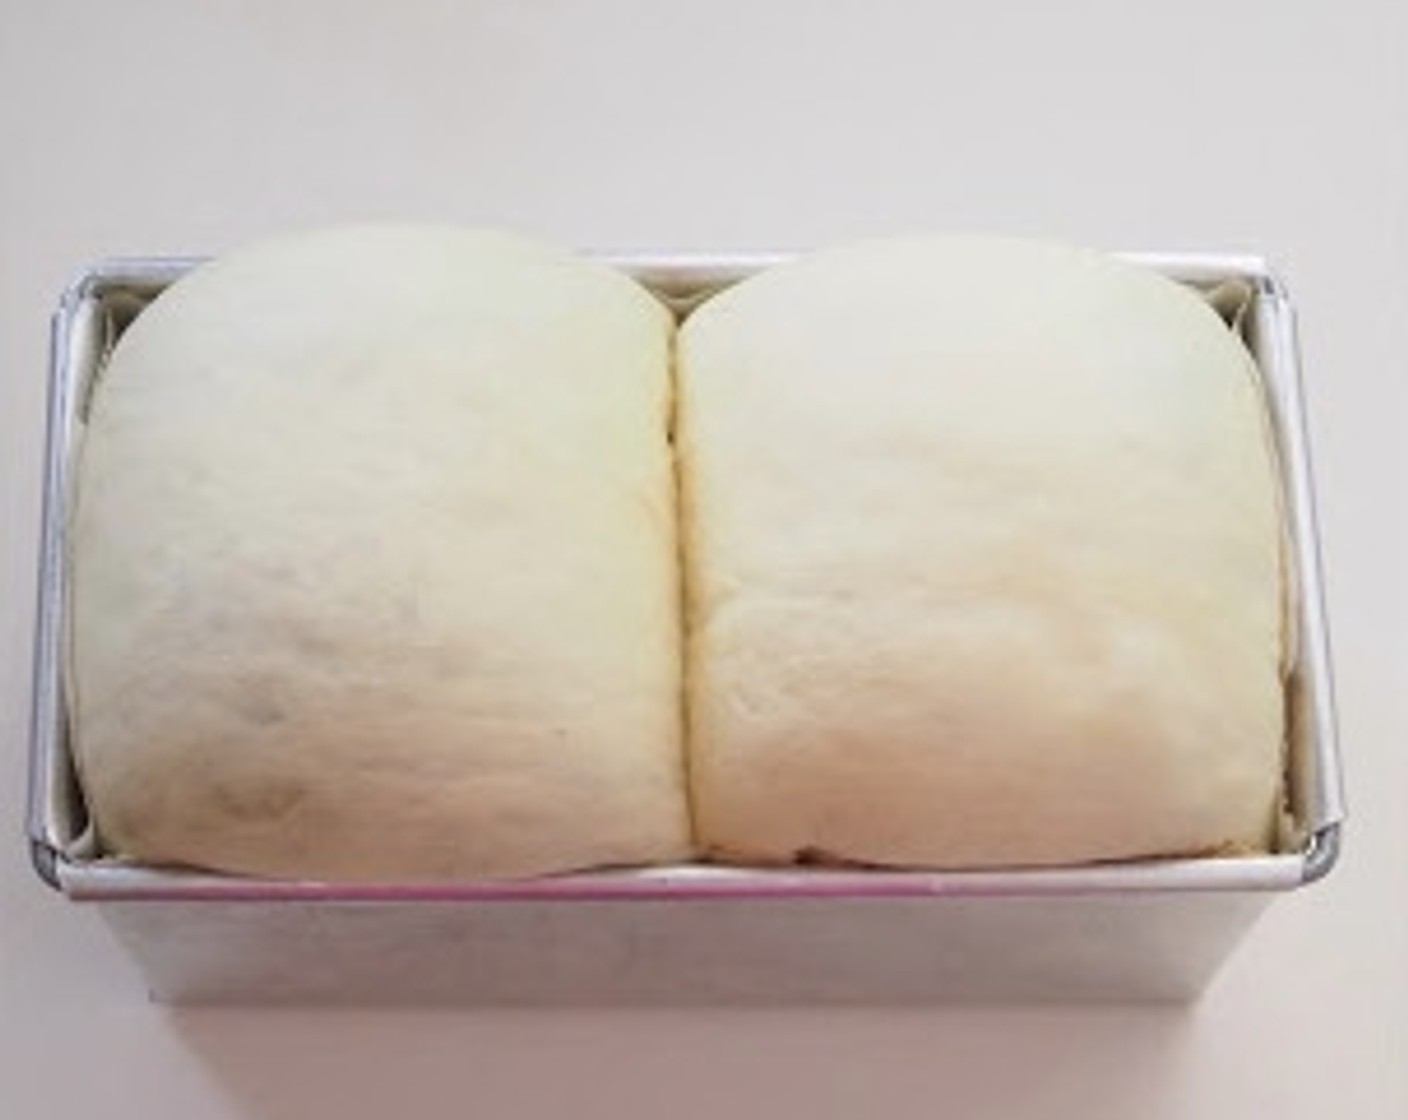 step 9 Place the dough in a loaf pan lined with parchment paper. Let it rise for another 45 minutes to 1 hour, or until double in size.